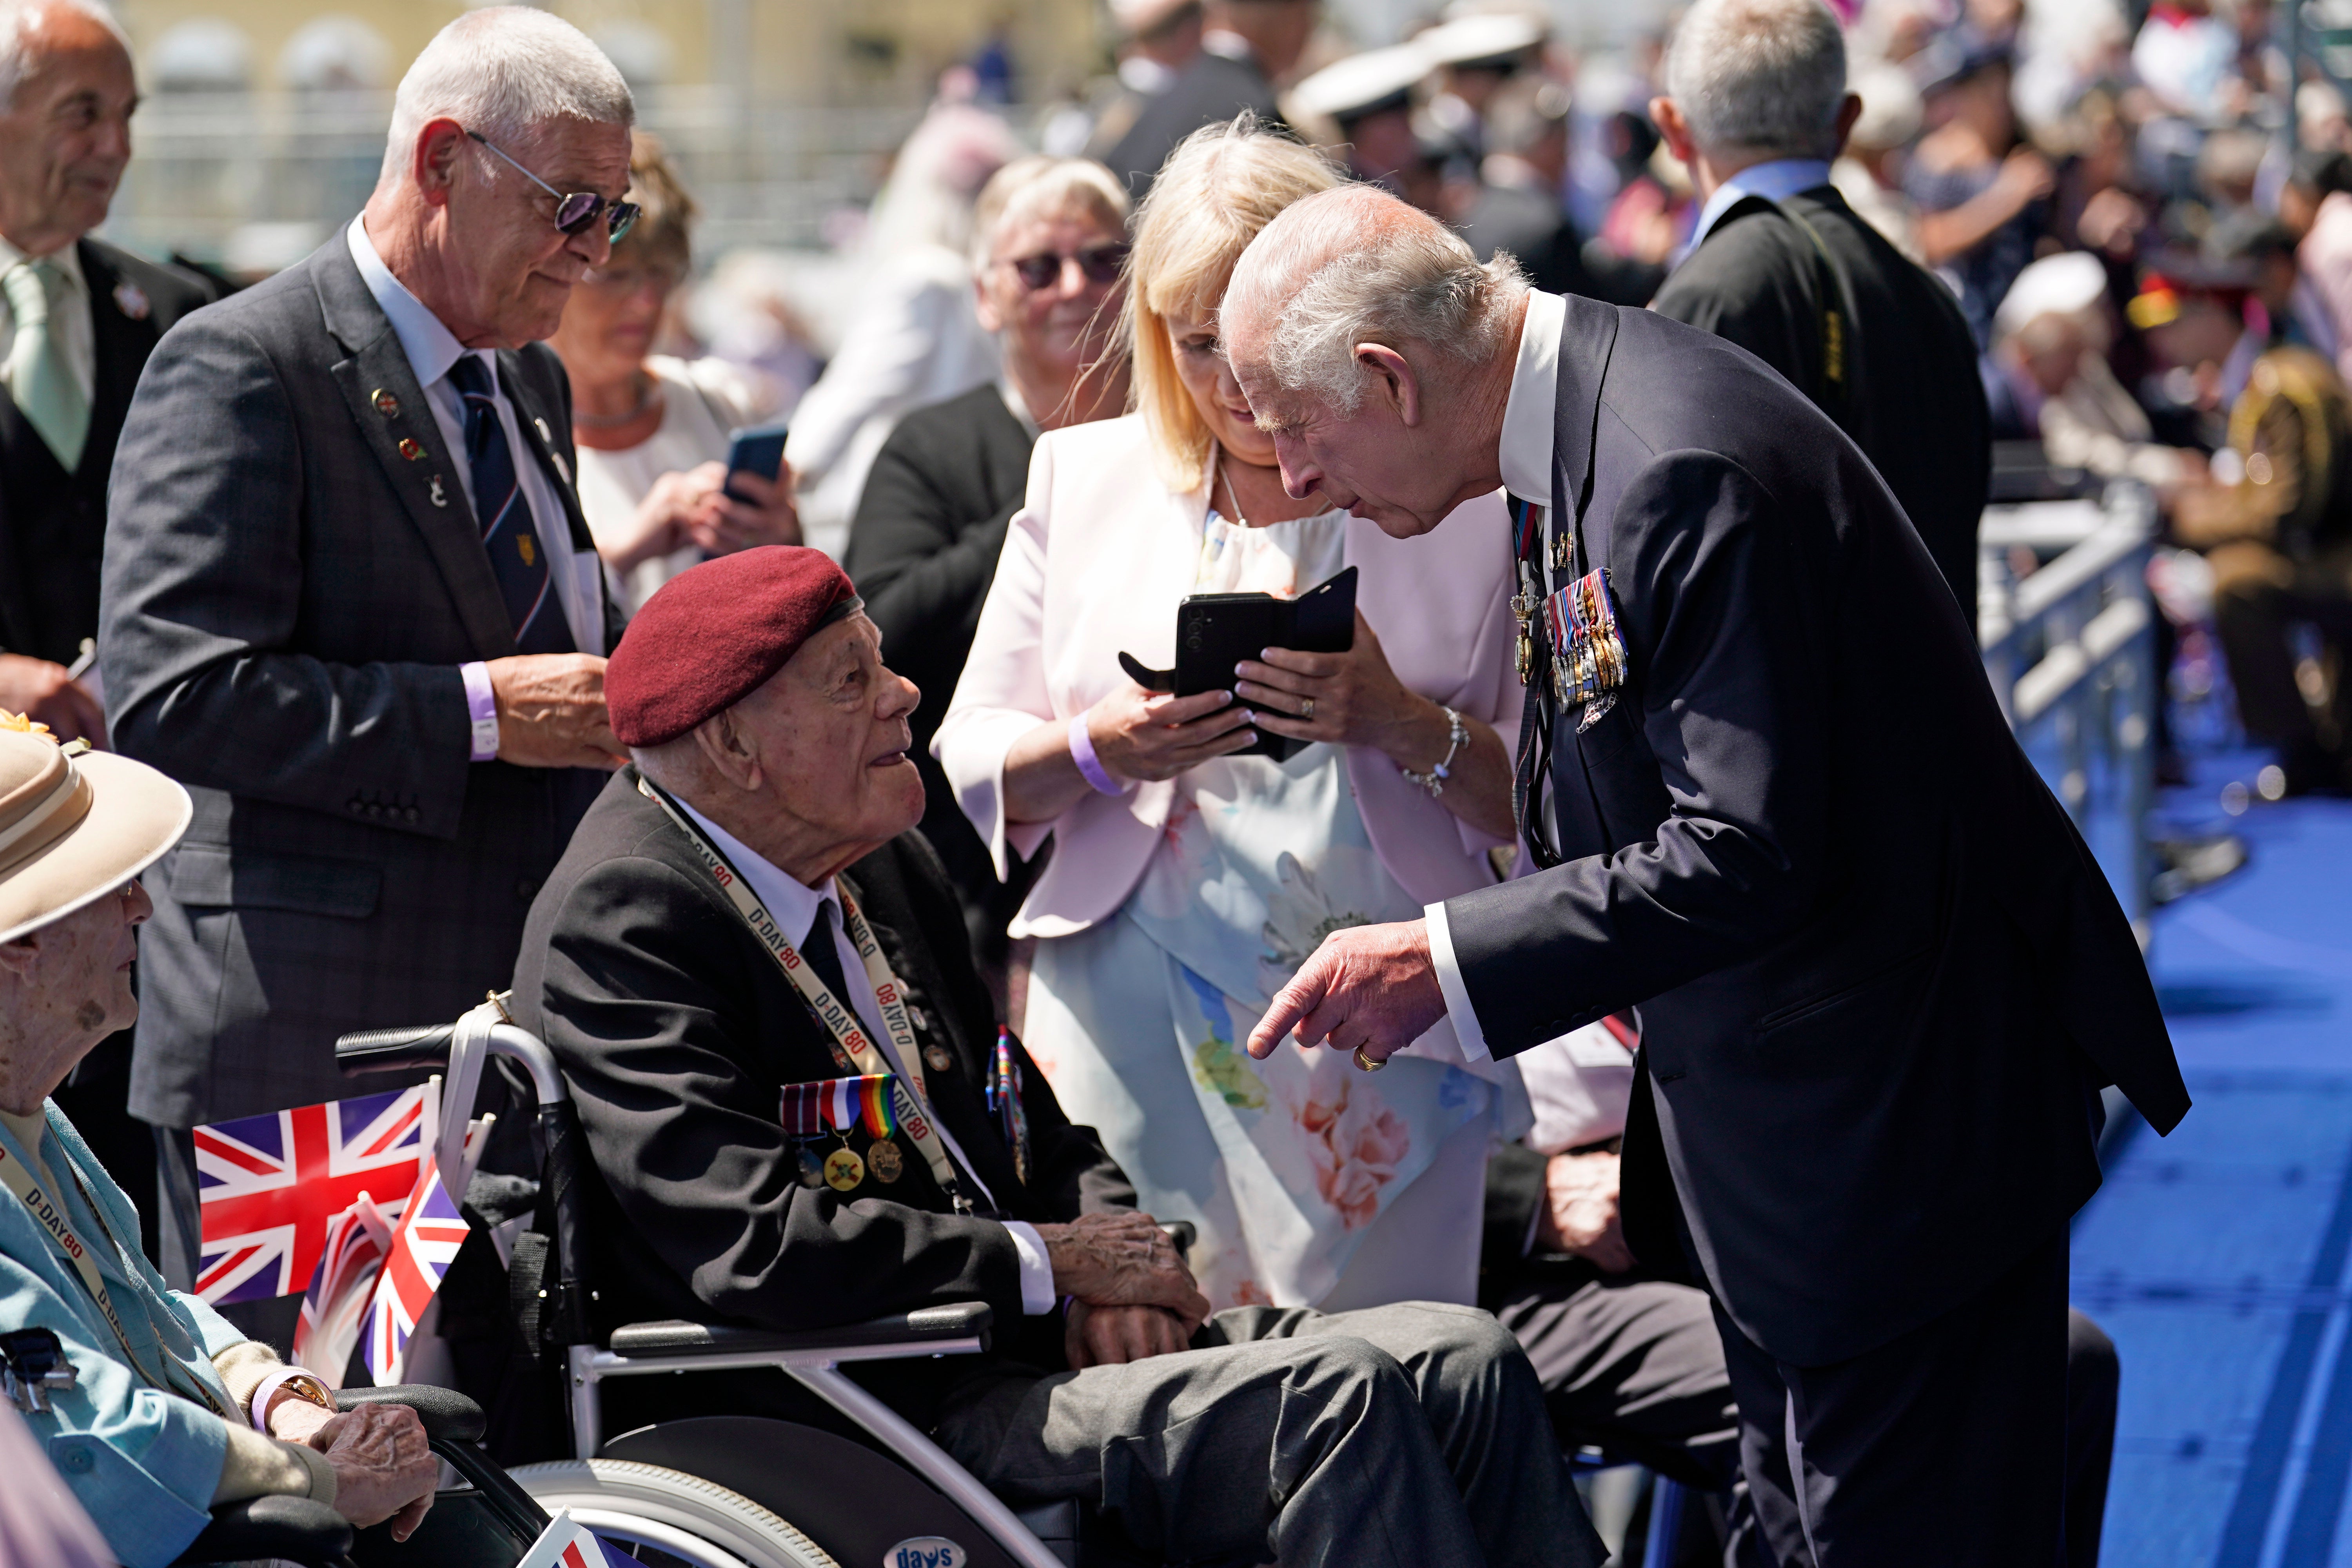 Charles also spoken to a number of servicemen